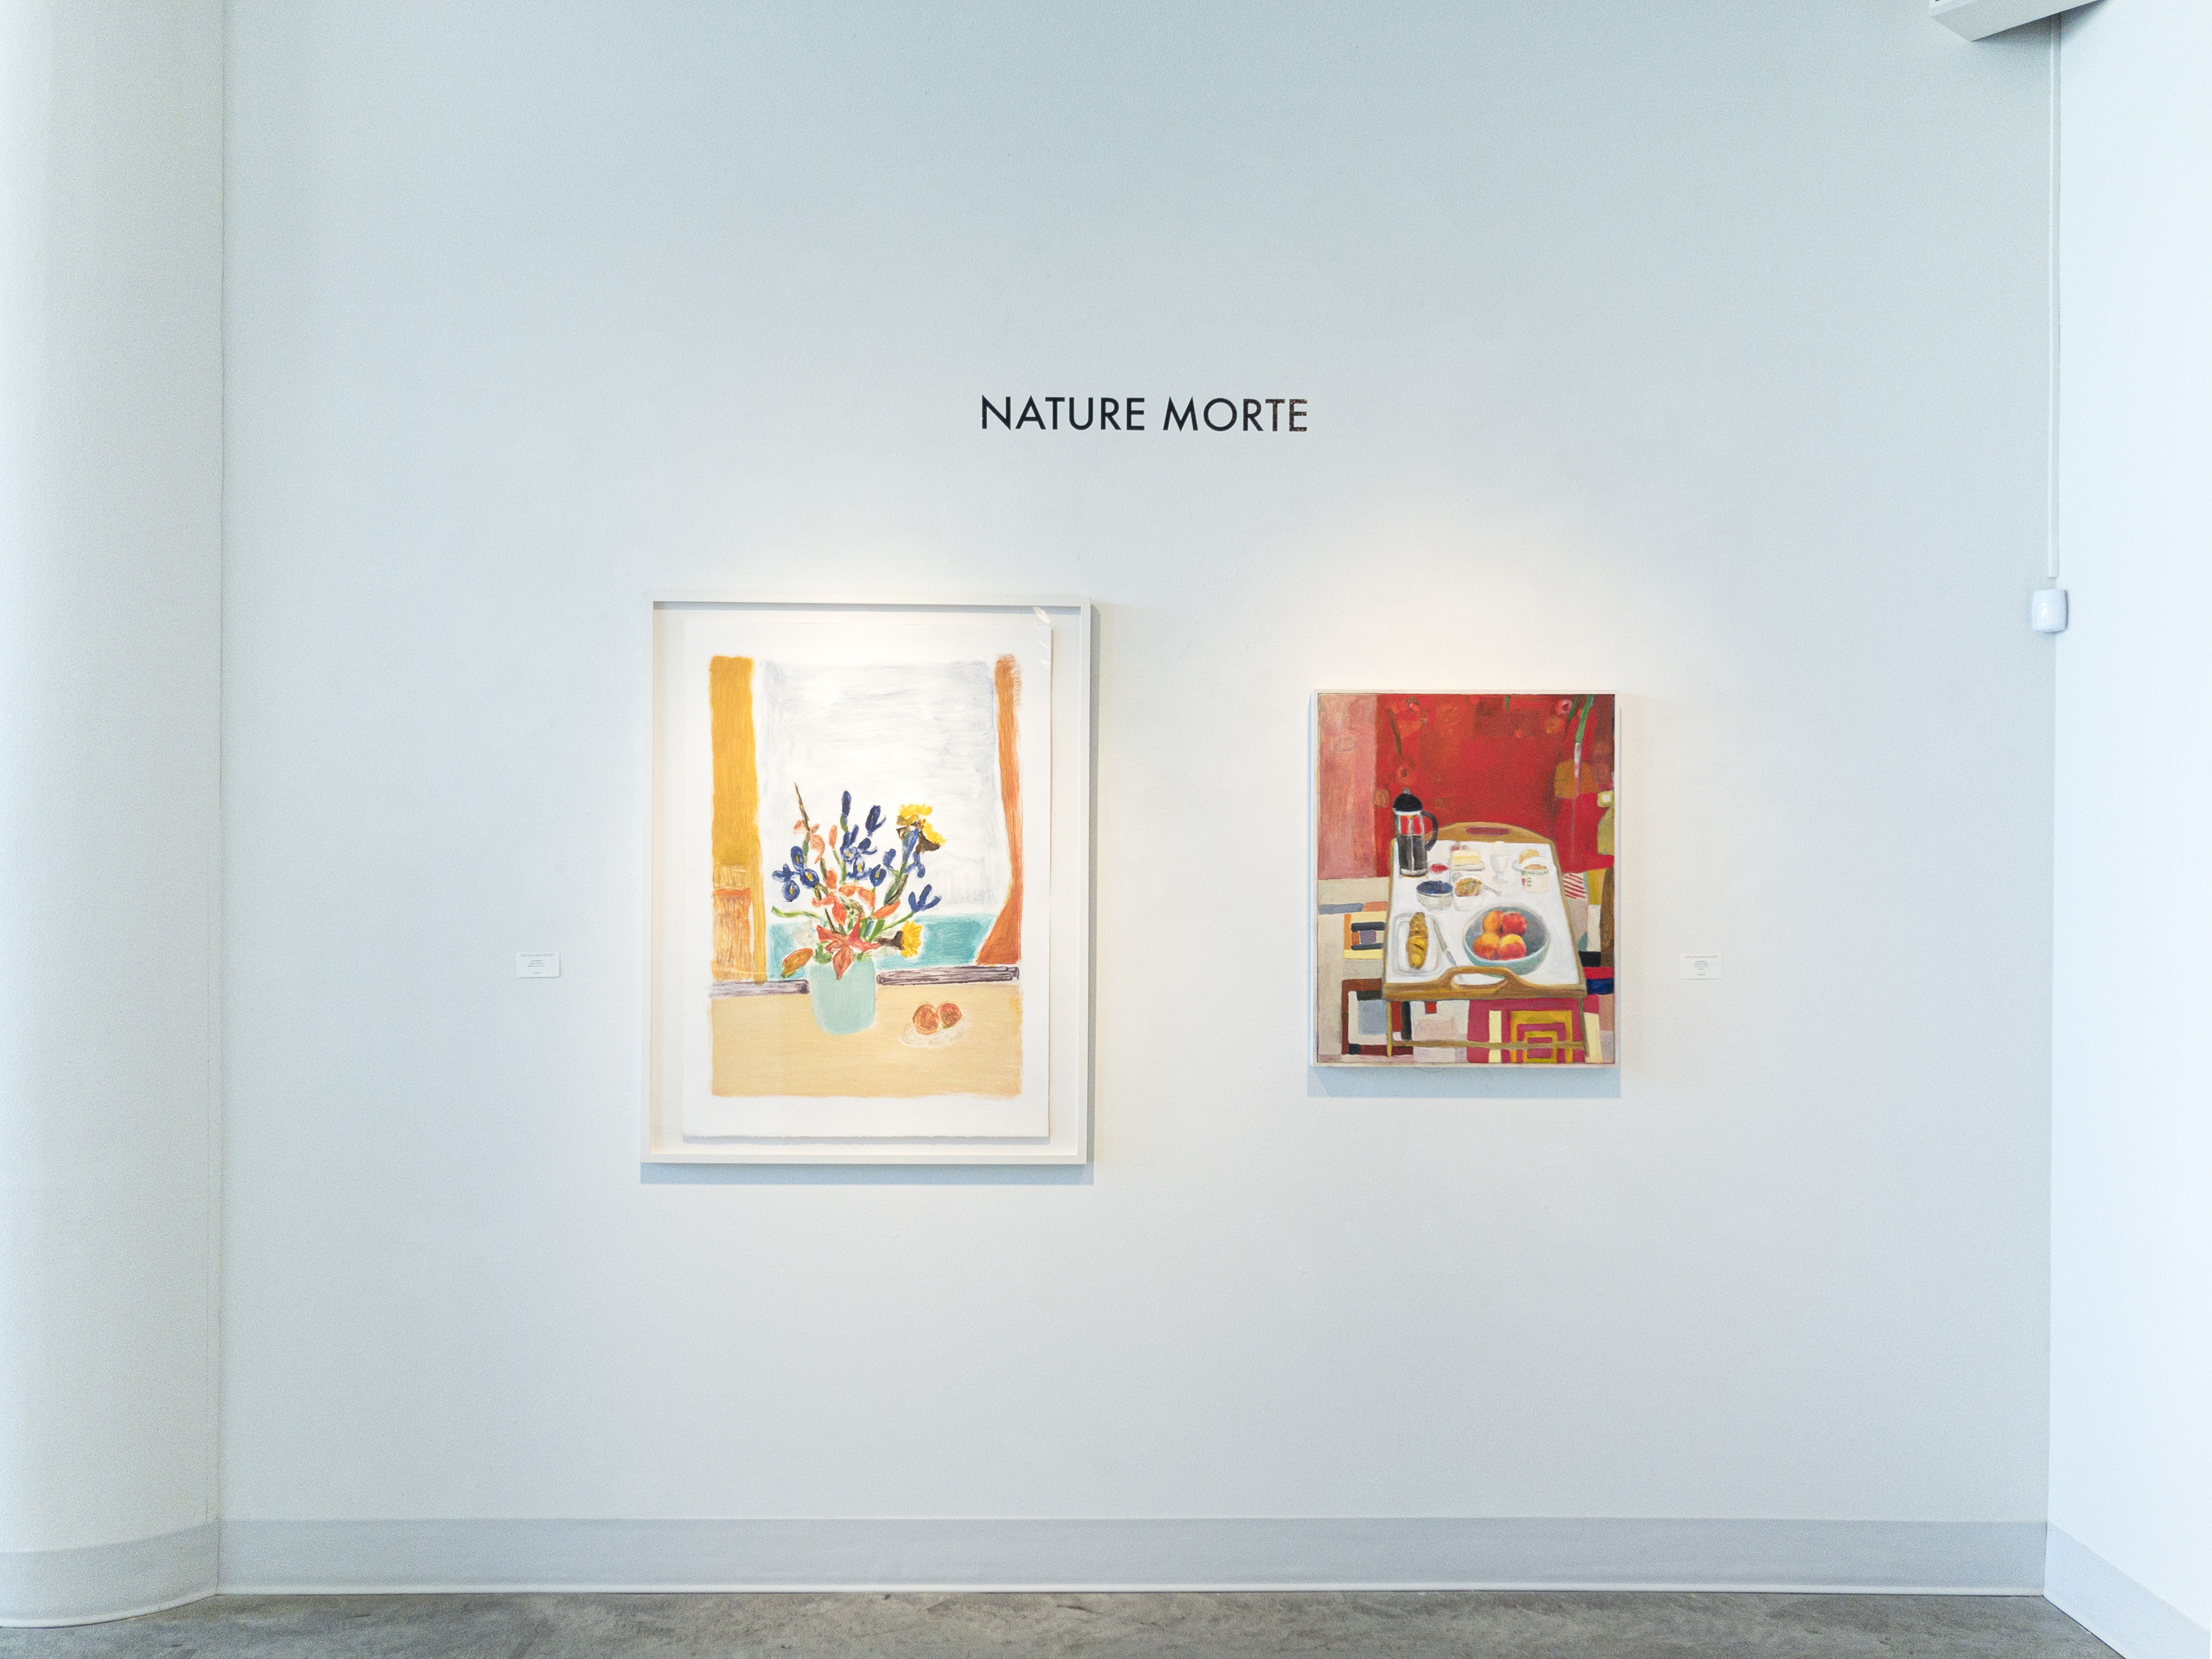 Nature Morte: An Exhibition of Contemporary Still Life Gallery. Photo courtesy of the Tory Folliard Gallery.